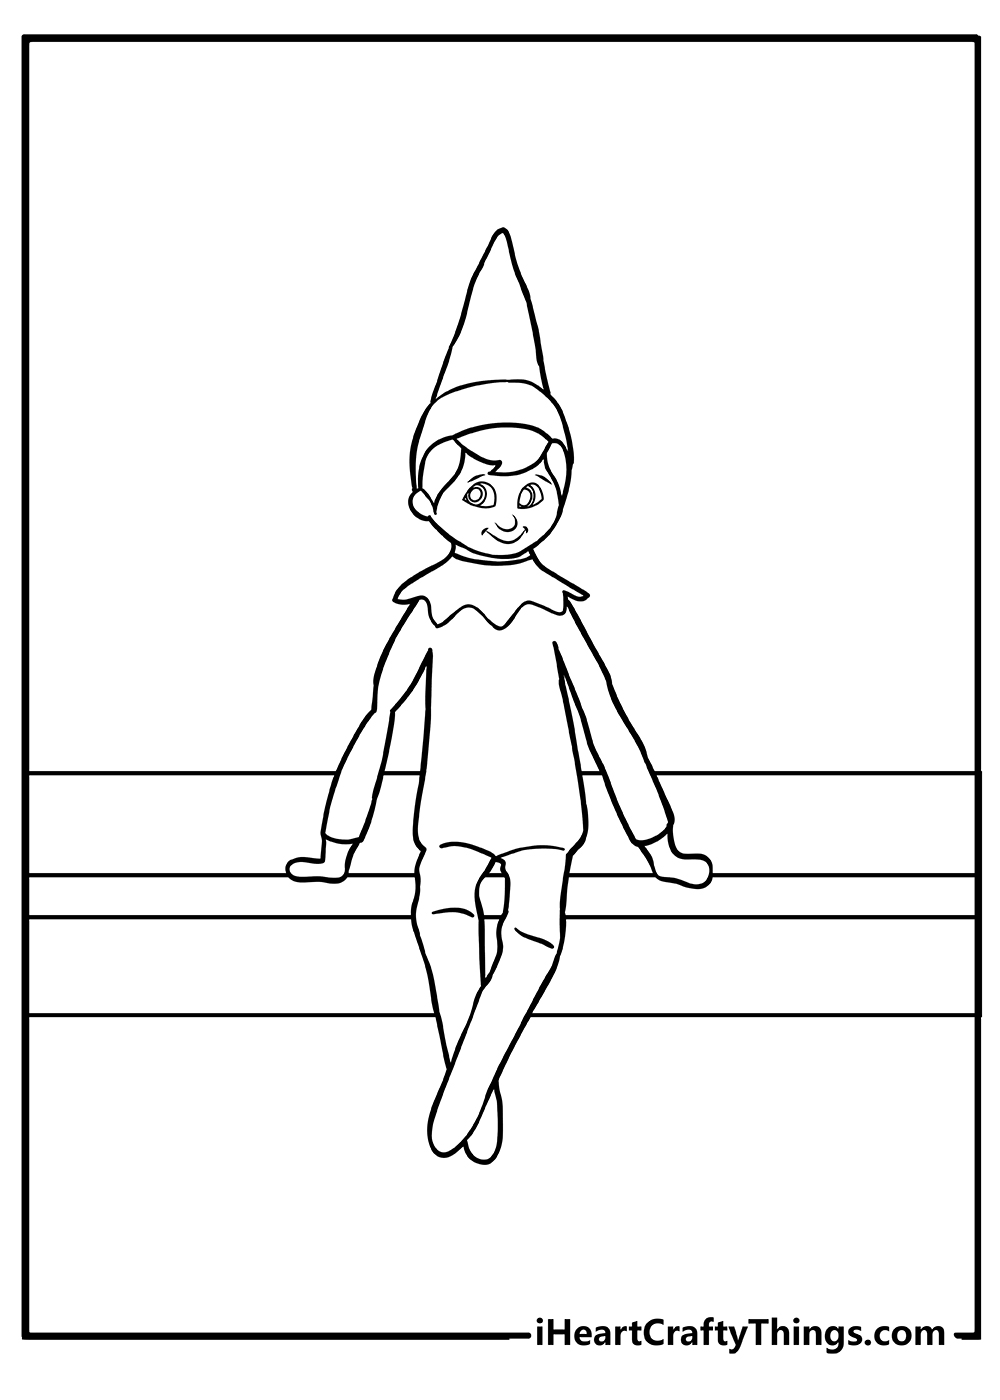 Printable Elf On The Shelf Coloring Pages Updated 20